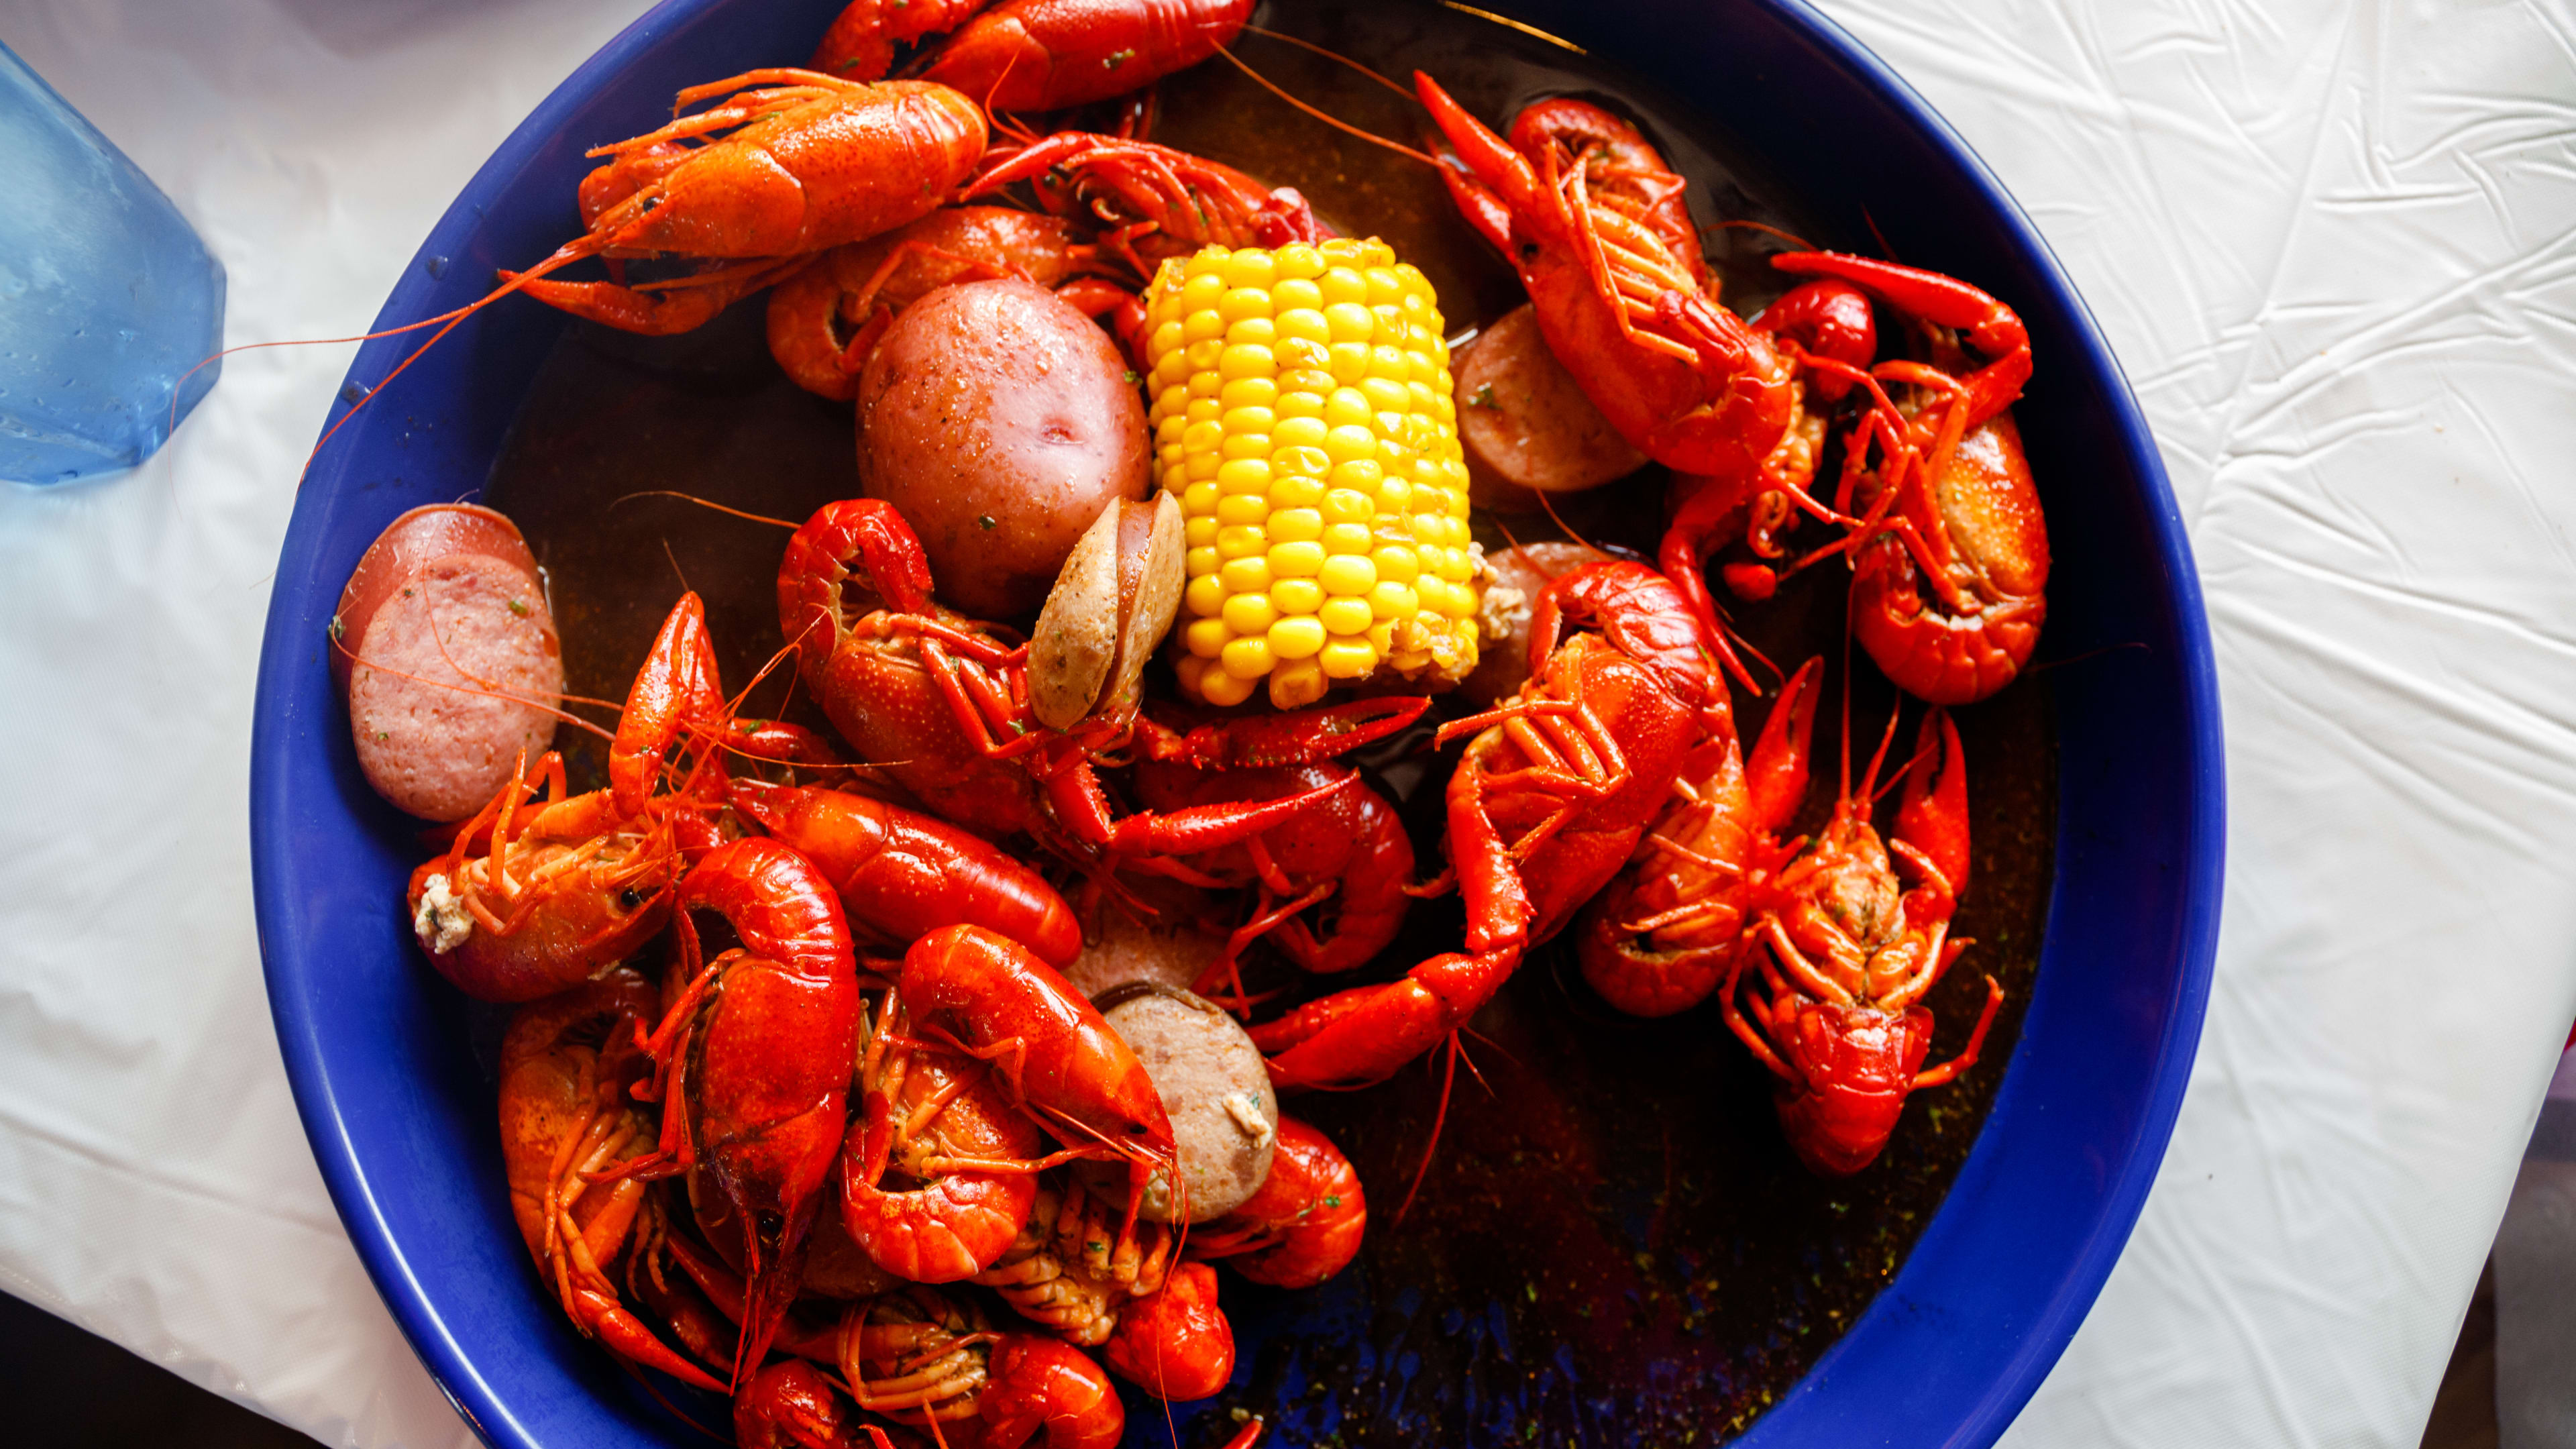 The Best Crawfish Spots In Houston image